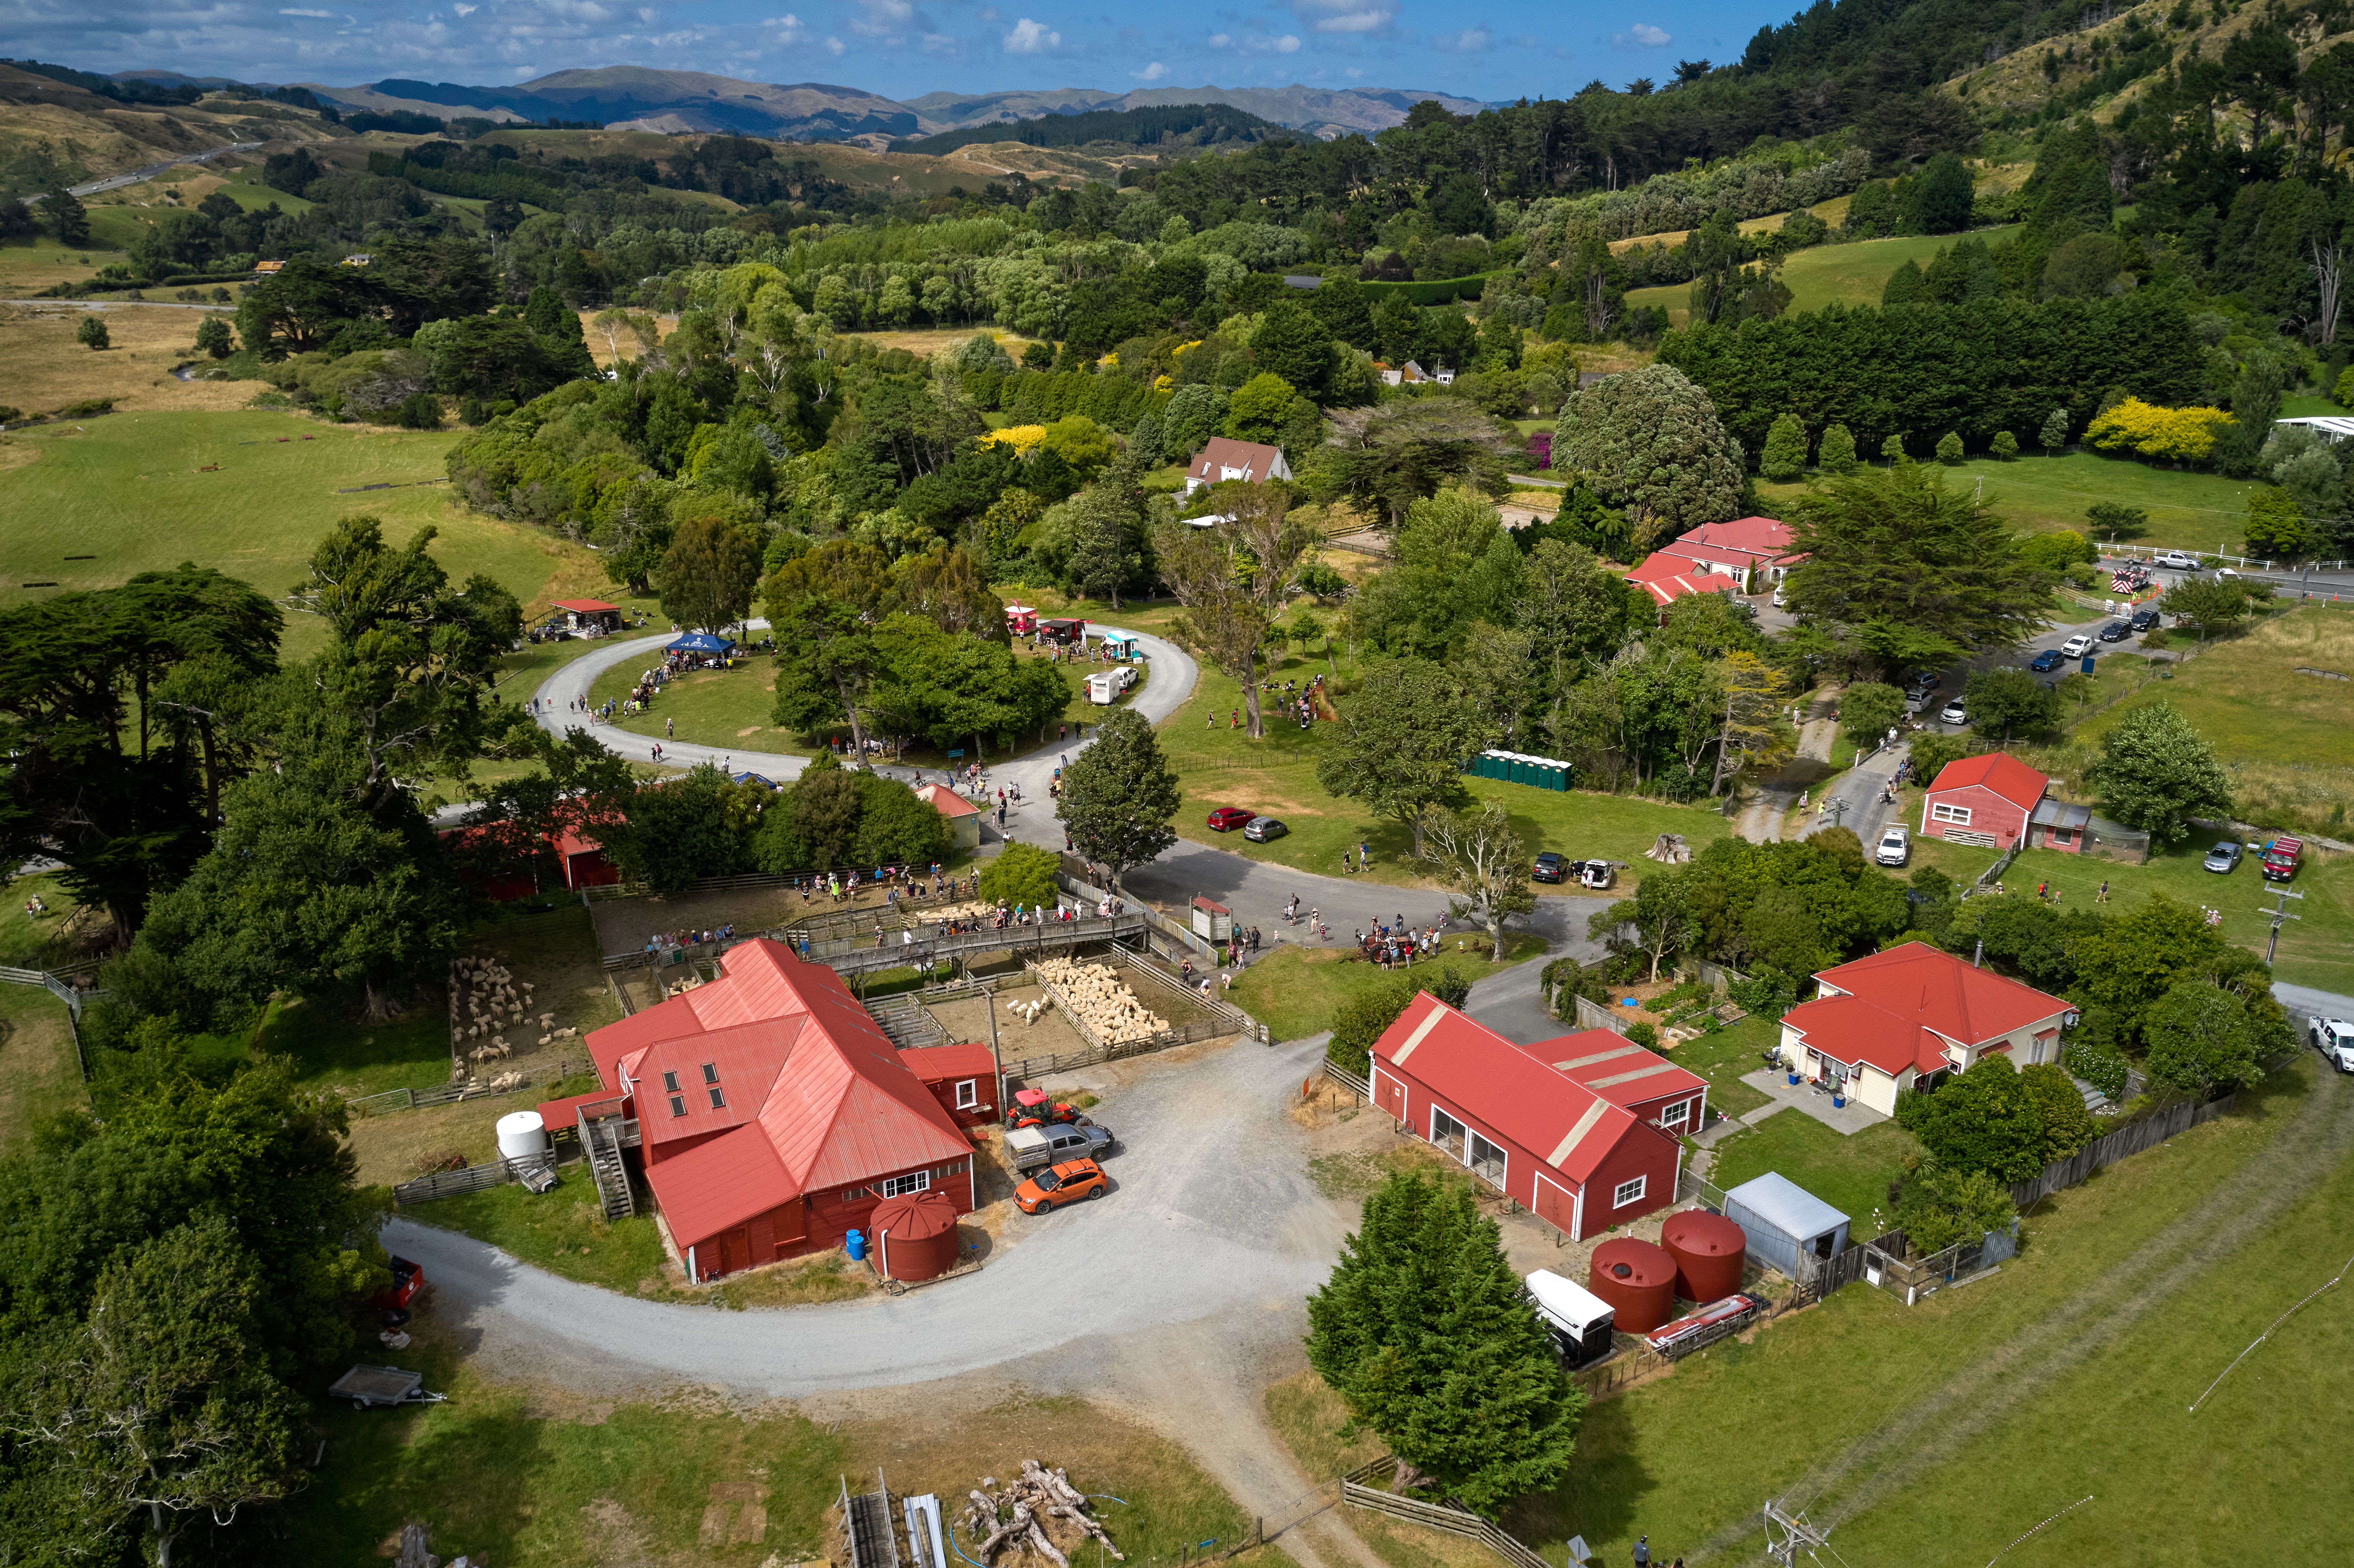 A birds-eye-view of some of the buildings at Battle Hill Farm Forest Park